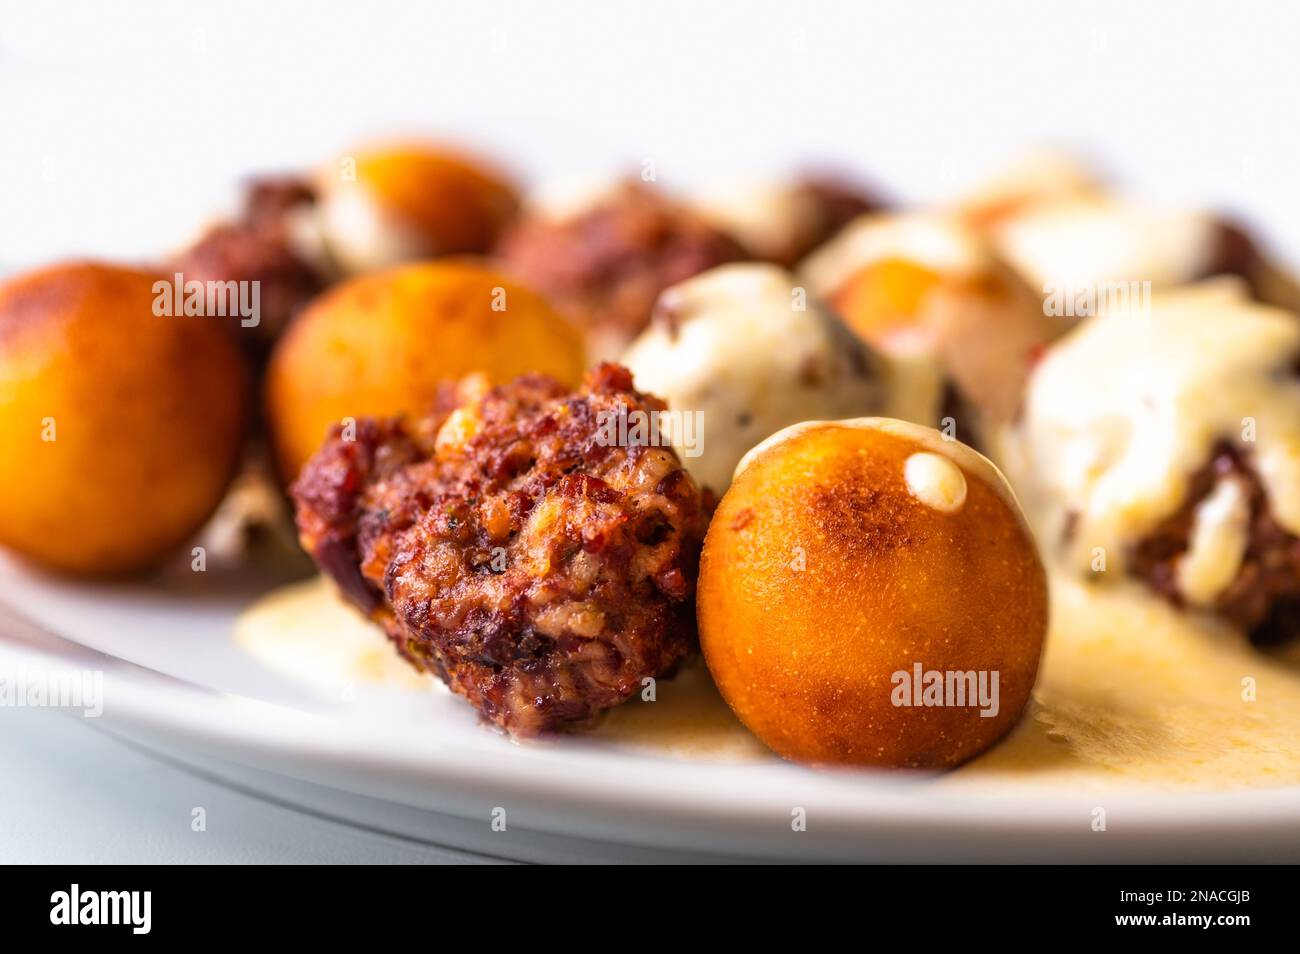 Baked meatball with fried croquette in cheese lemon sauce on white plate, closeup. Stock Photo